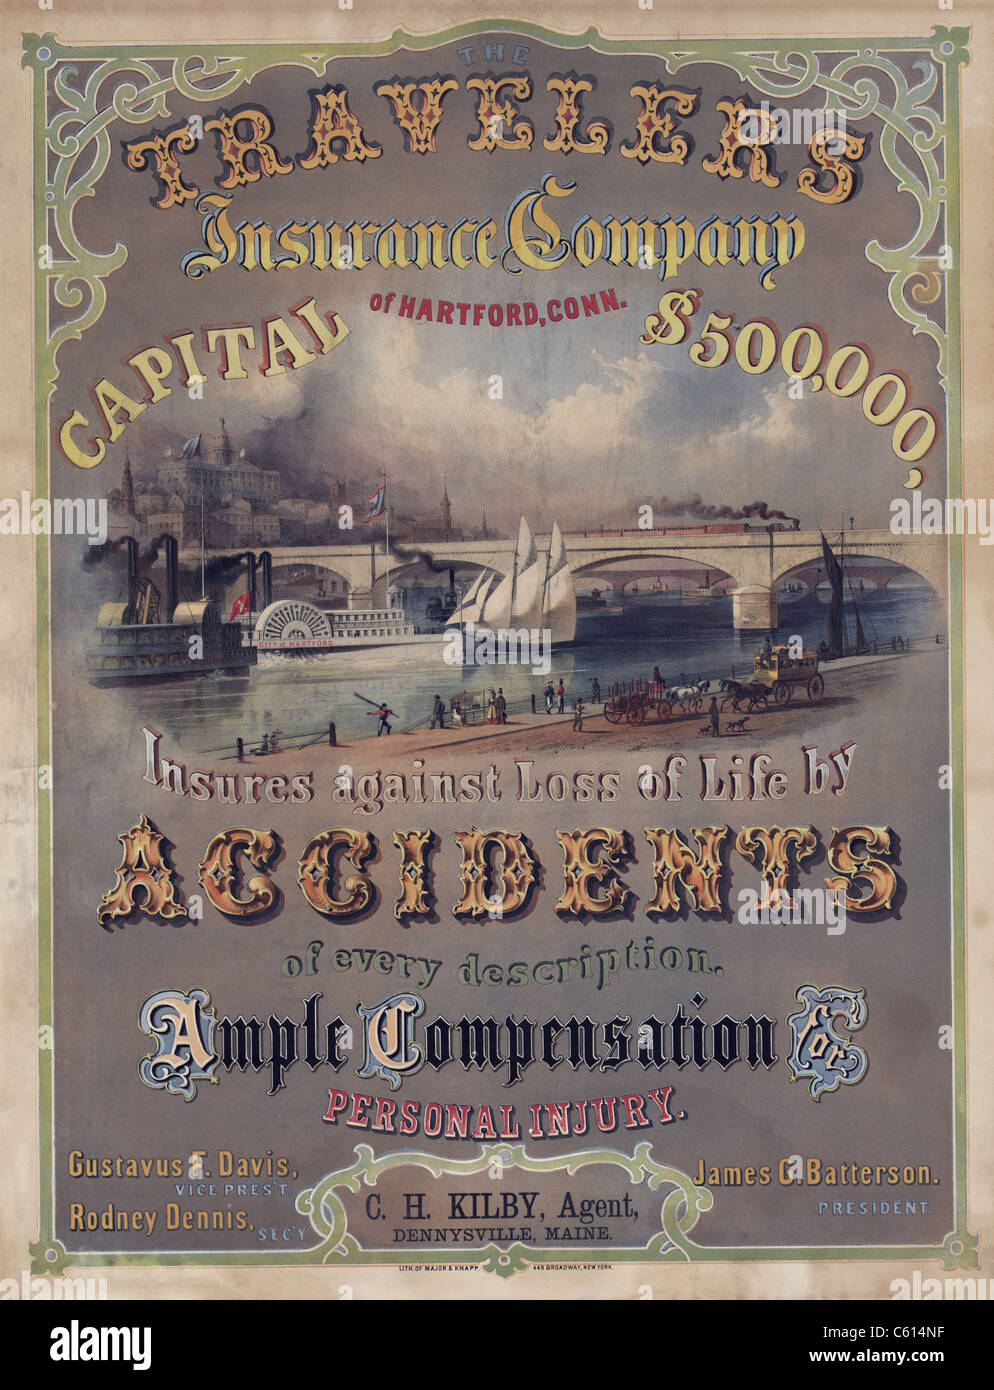 Travelers Insurance Company advertising poster. The company was founded in 1864 in Hartford Connecticut. Late 19th century. (BSLOC 2010 18 46) Stock Photo